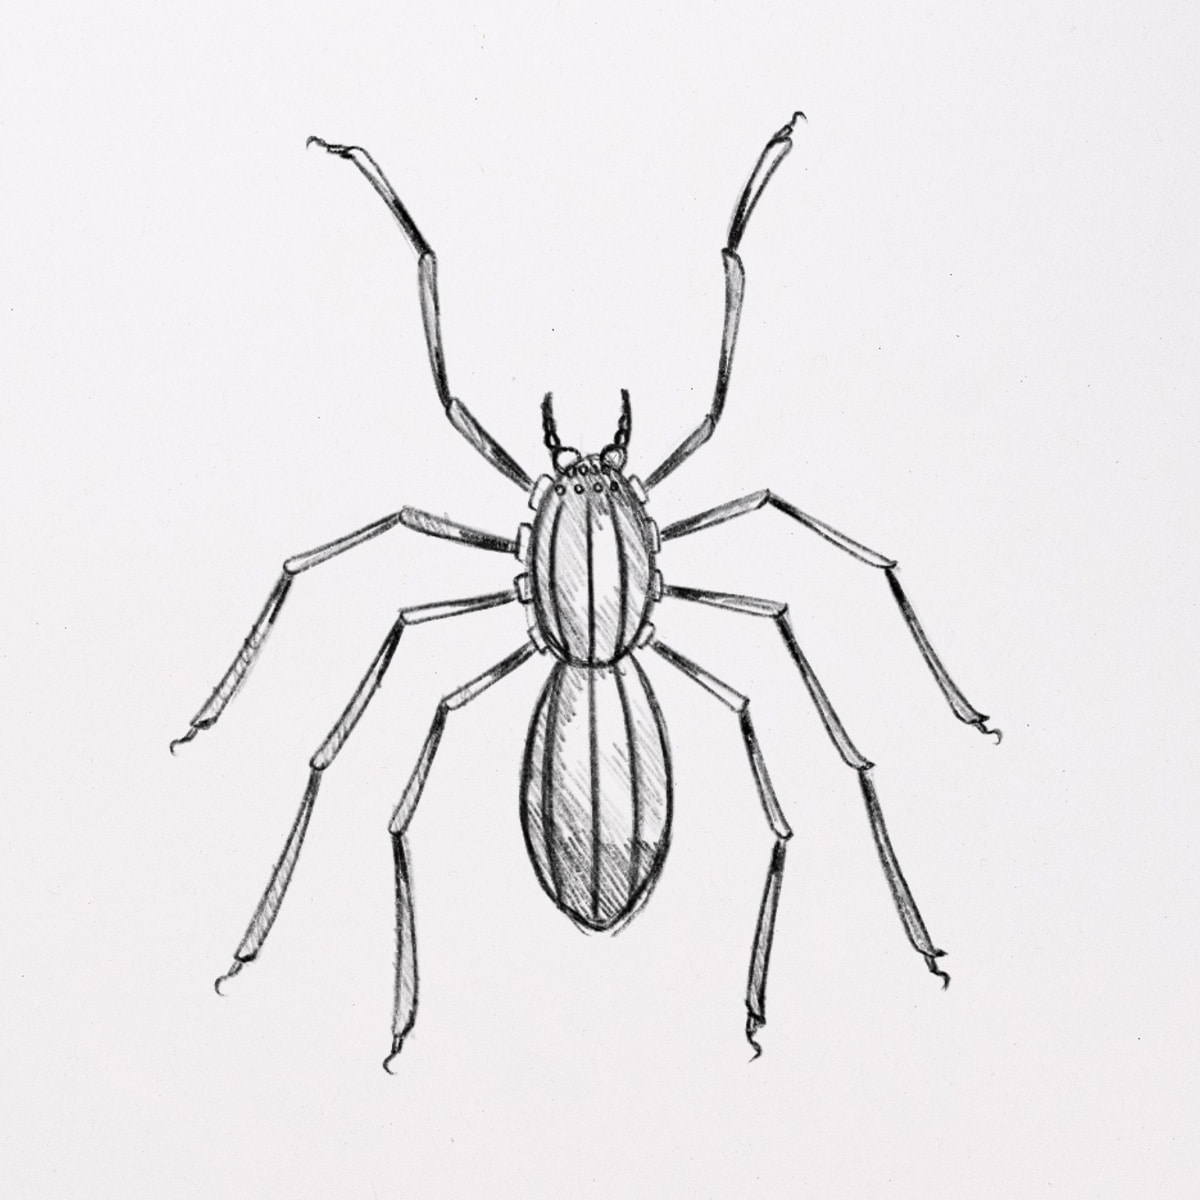 Shading the spider